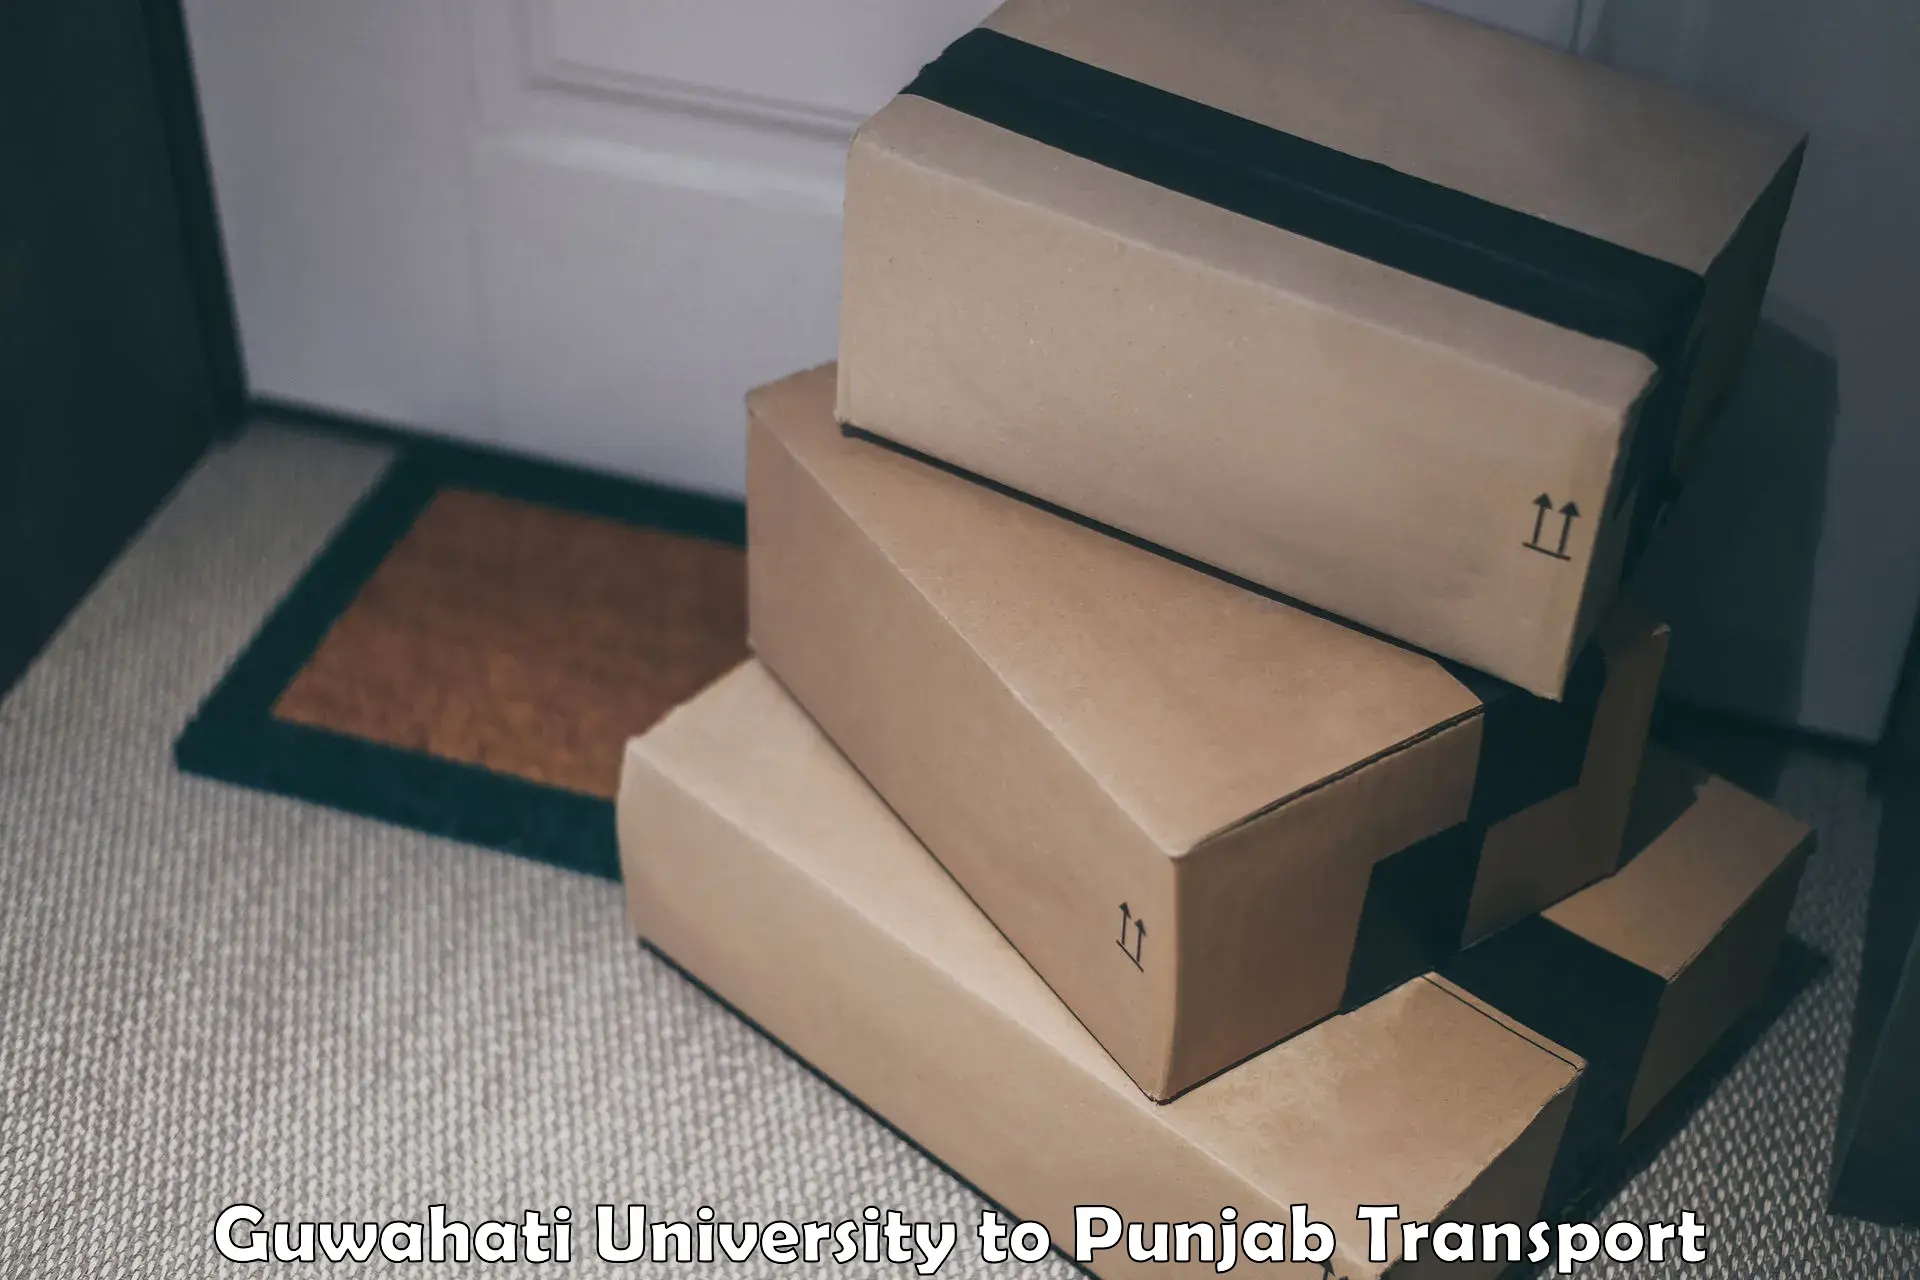 Package delivery services Guwahati University to Ropar